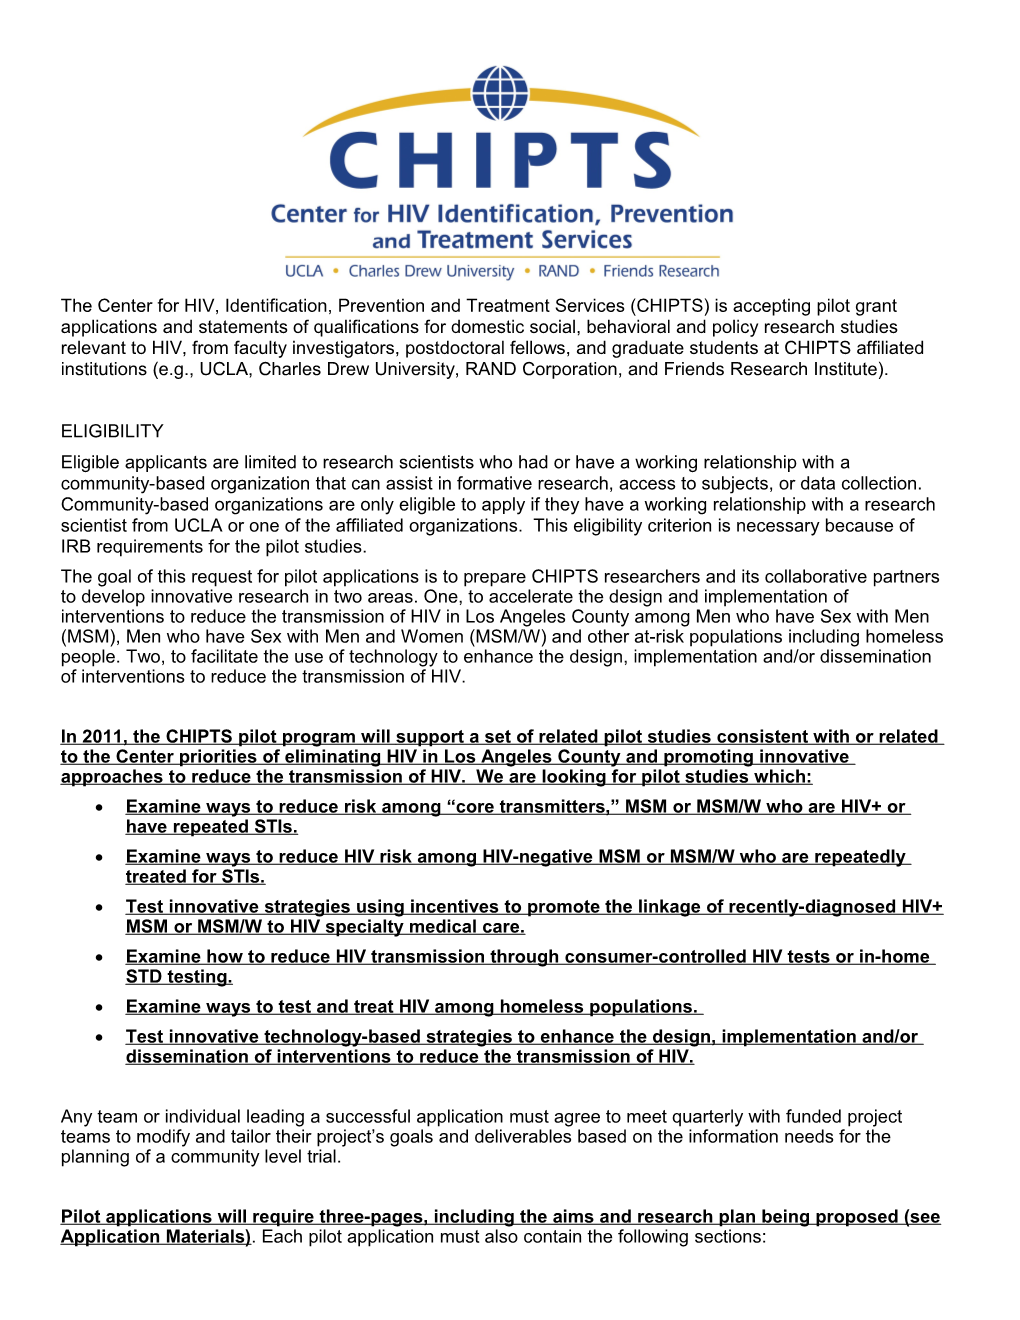 The Center for HIV, Identification, Prevention and Treatment Services (CHIPTS) Is Accepting